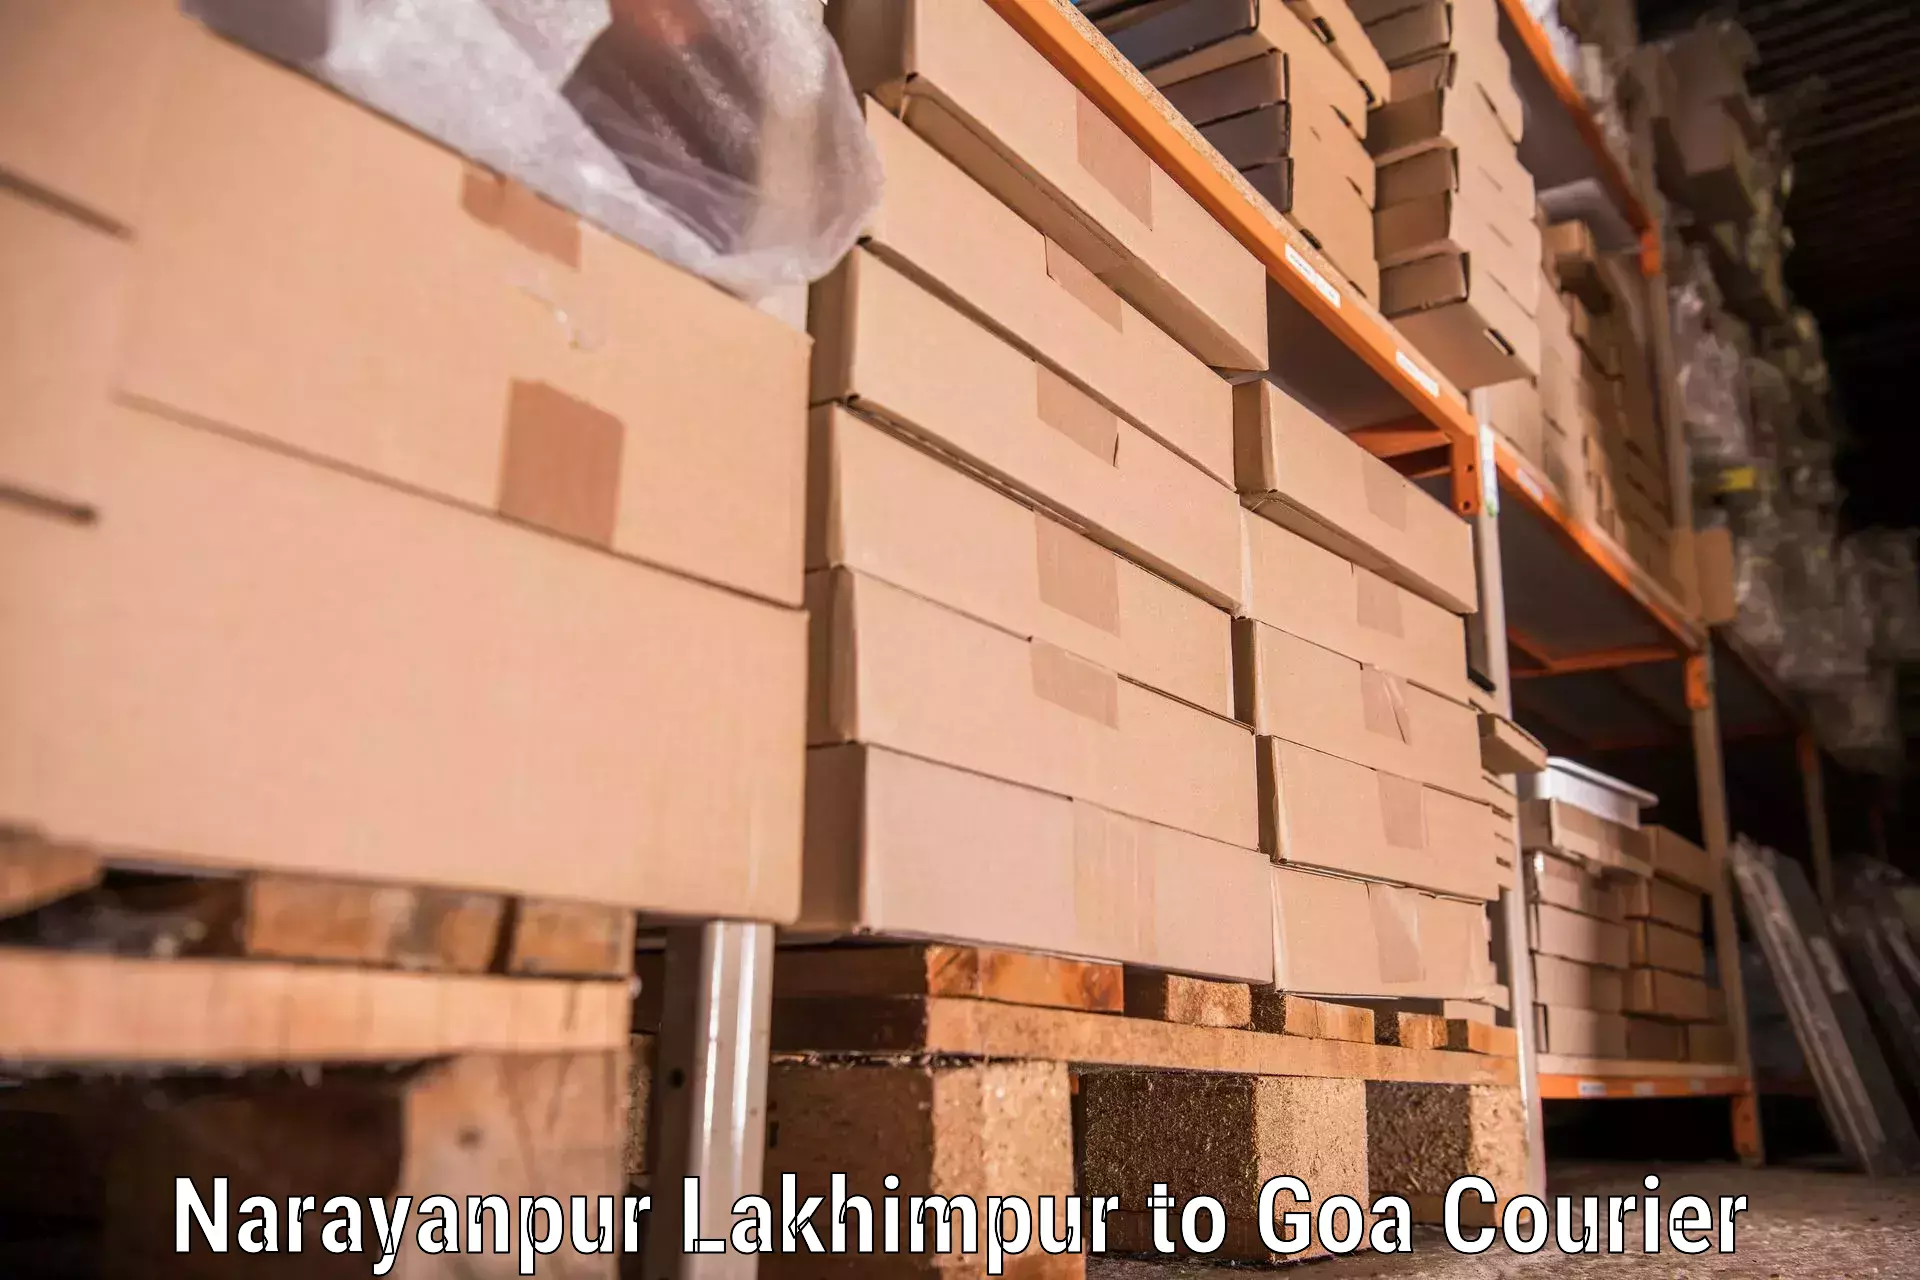 Efficient home goods movers Narayanpur Lakhimpur to South Goa